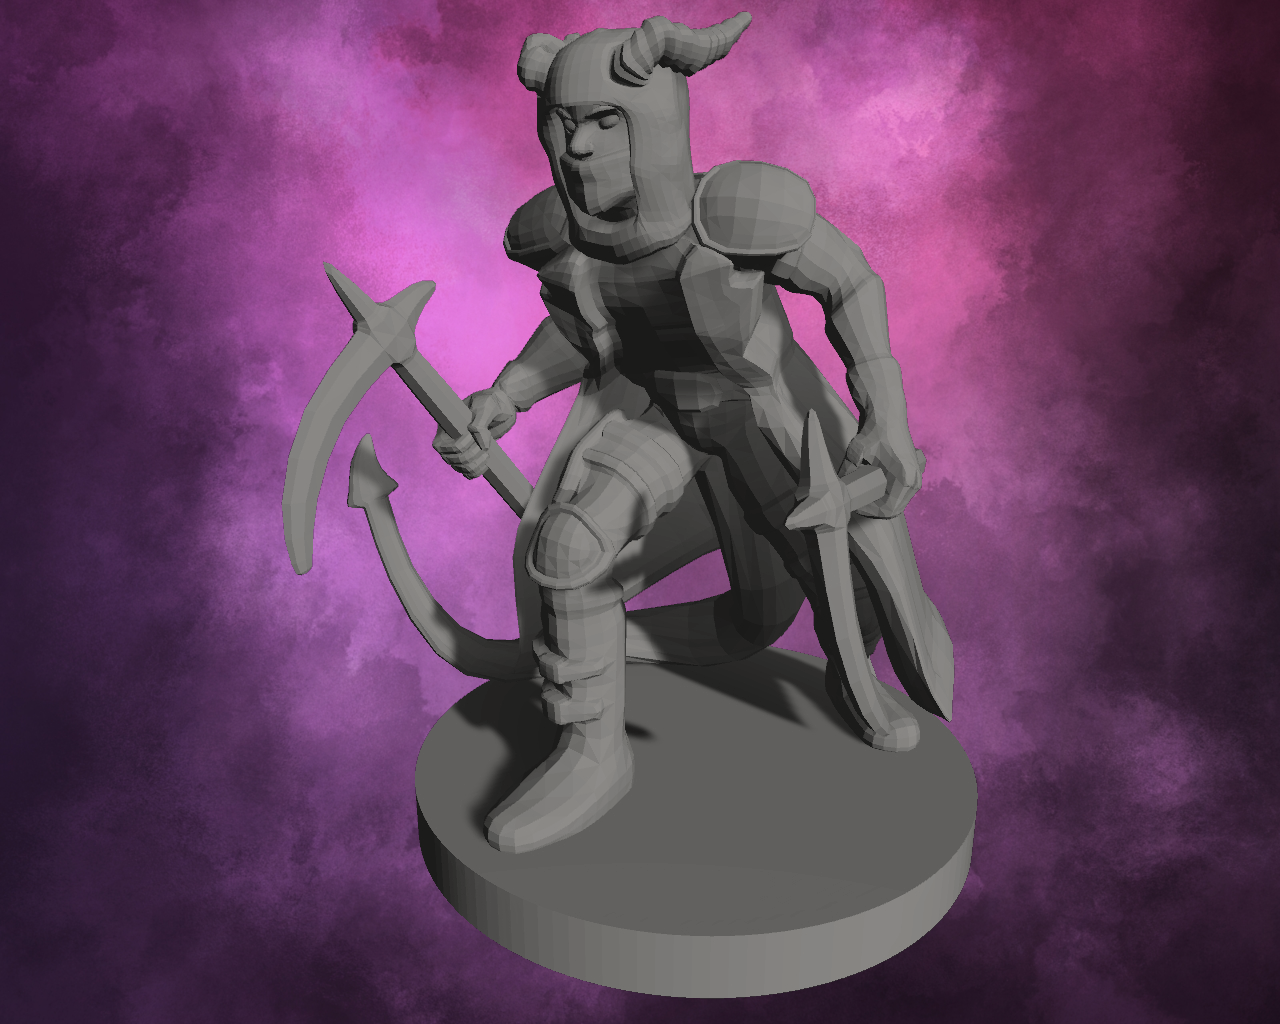 3D Printed Miniature - Tiefling Rogue with Scythes